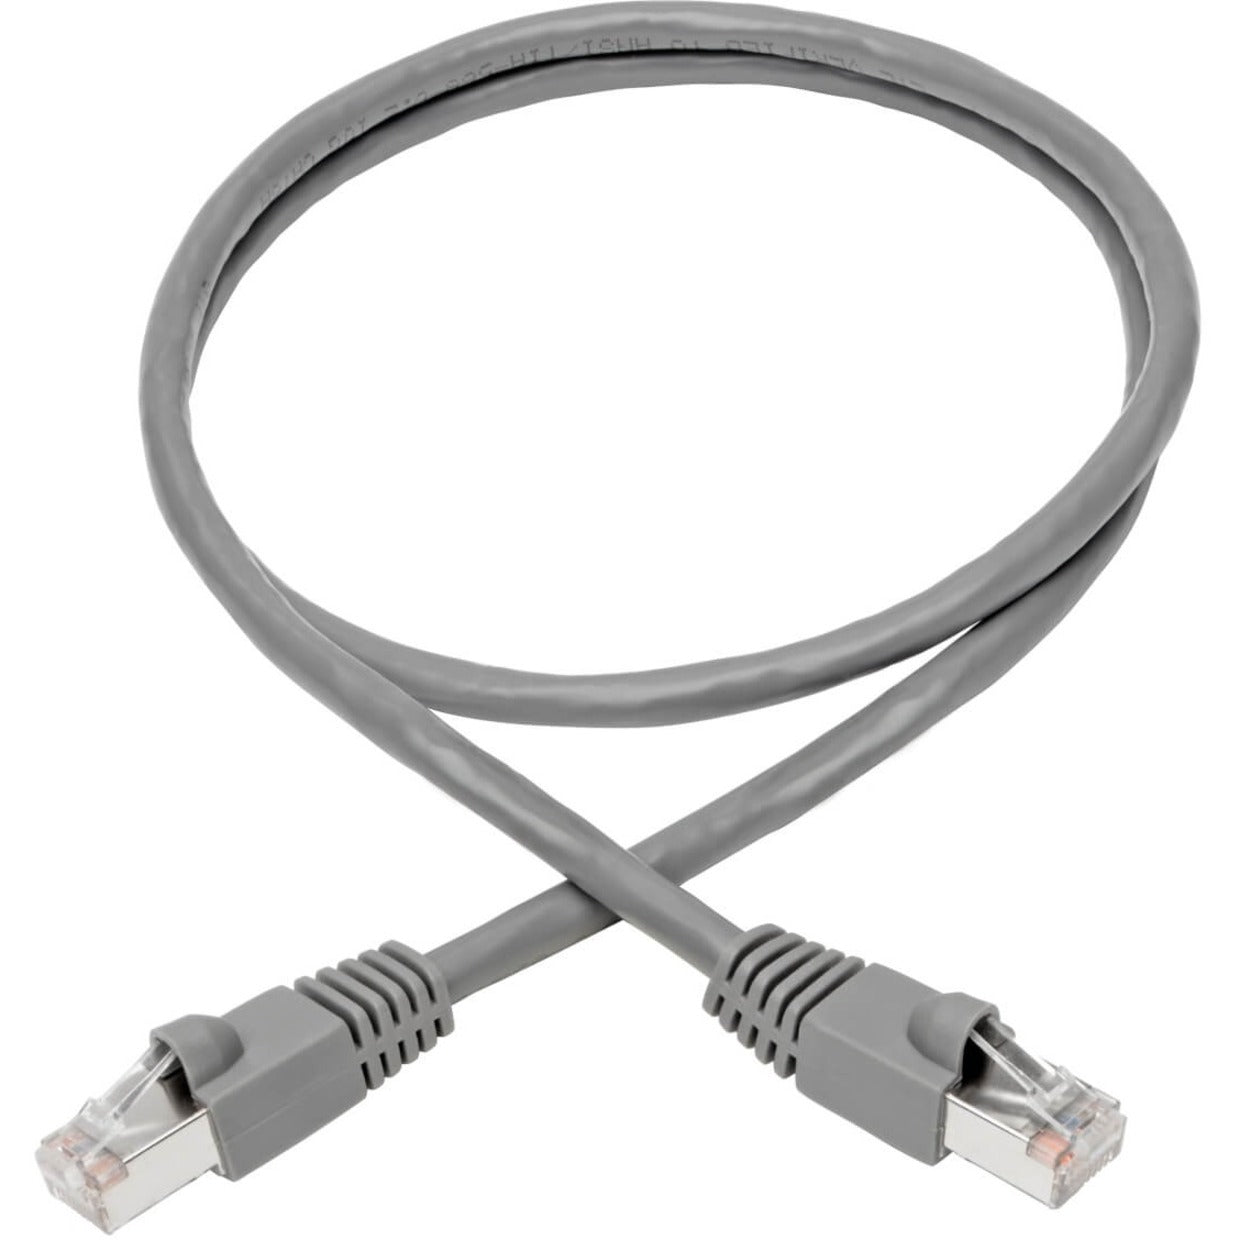 Tripp Lite N262-006-GY Cat.6a STP Patch Network Cable, 10G-Certified, Gray, 6ft